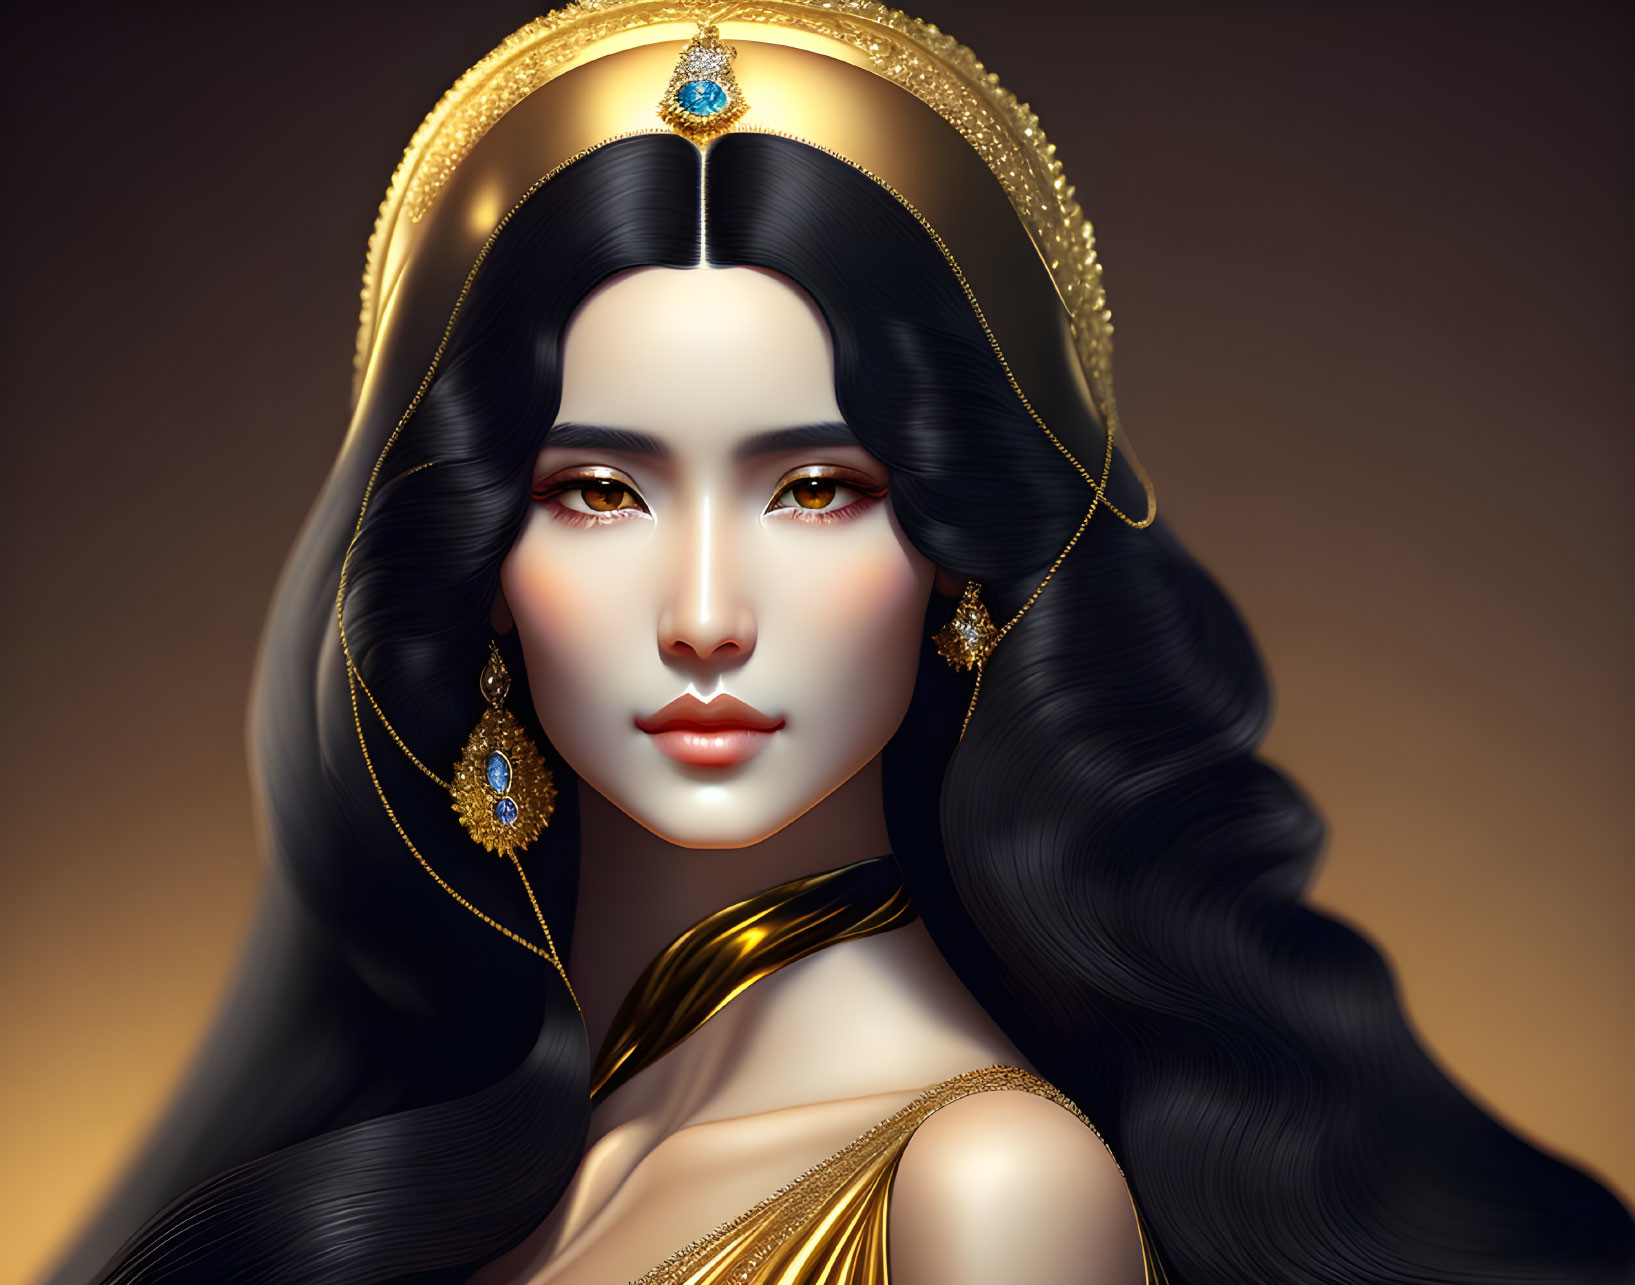 Woman with Long Black Hair and Golden Jewelry in Elegant Pose